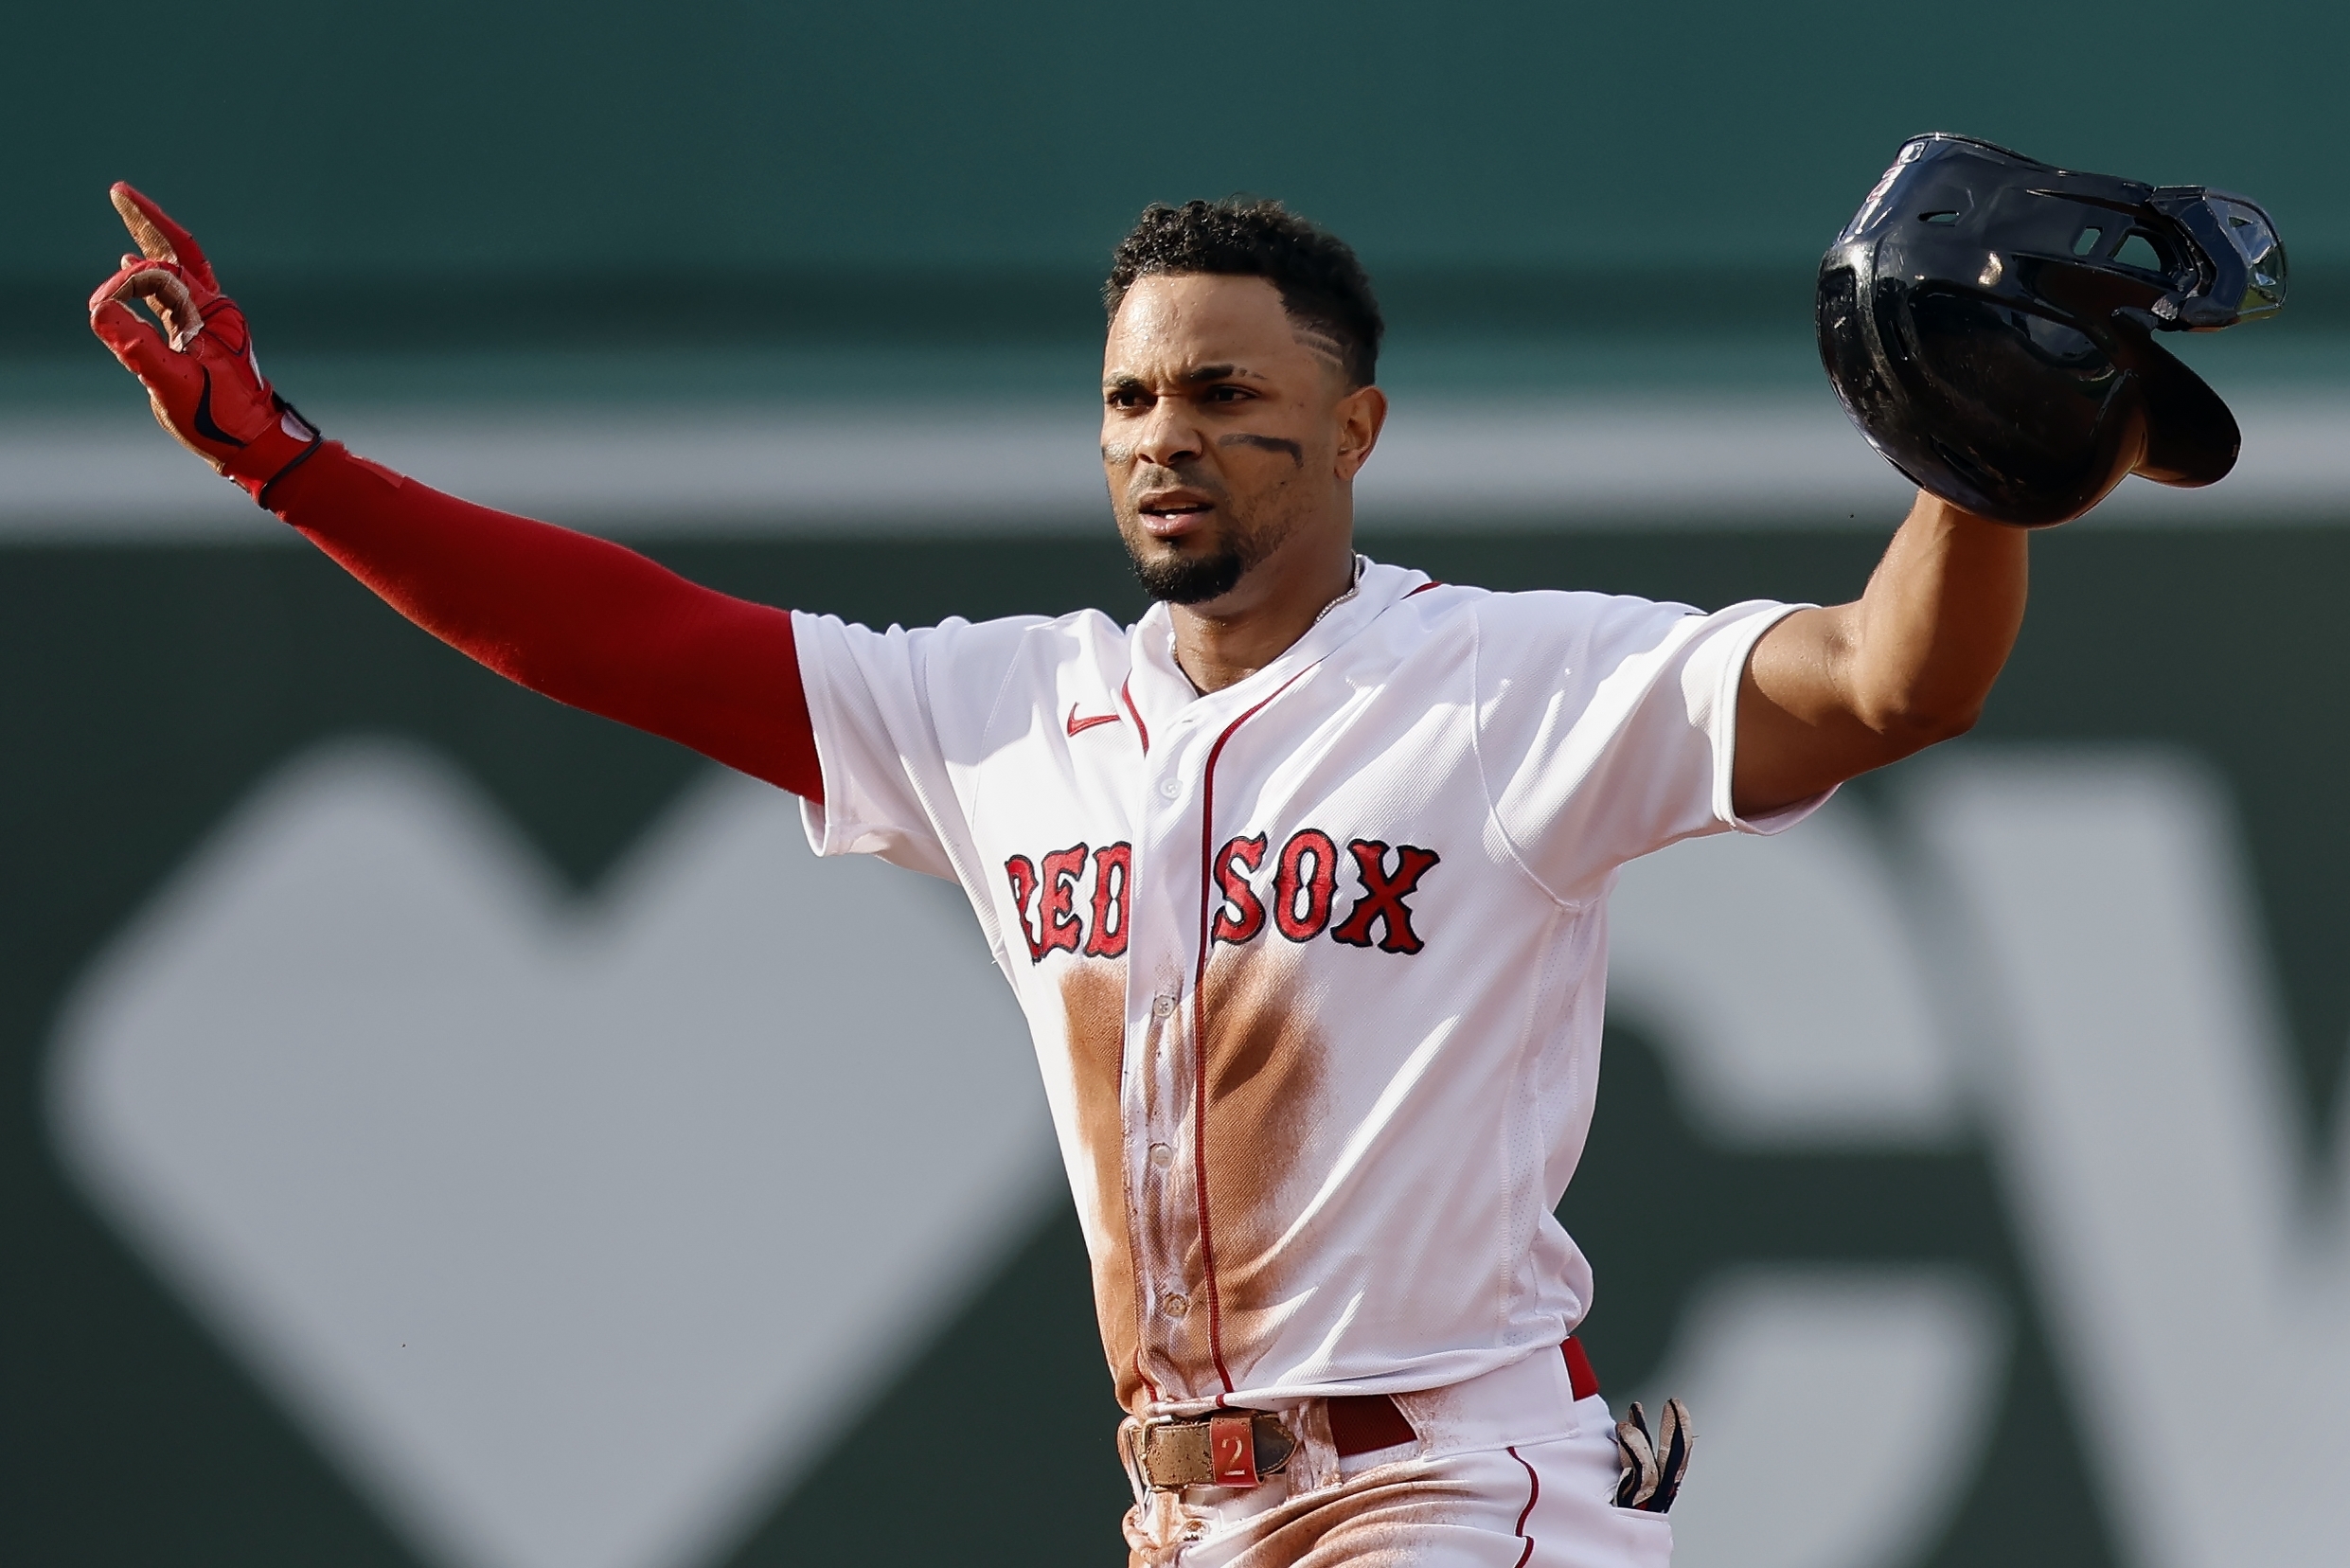 Mastrodonato: Xander Bogaerts offers perfect explanation for why